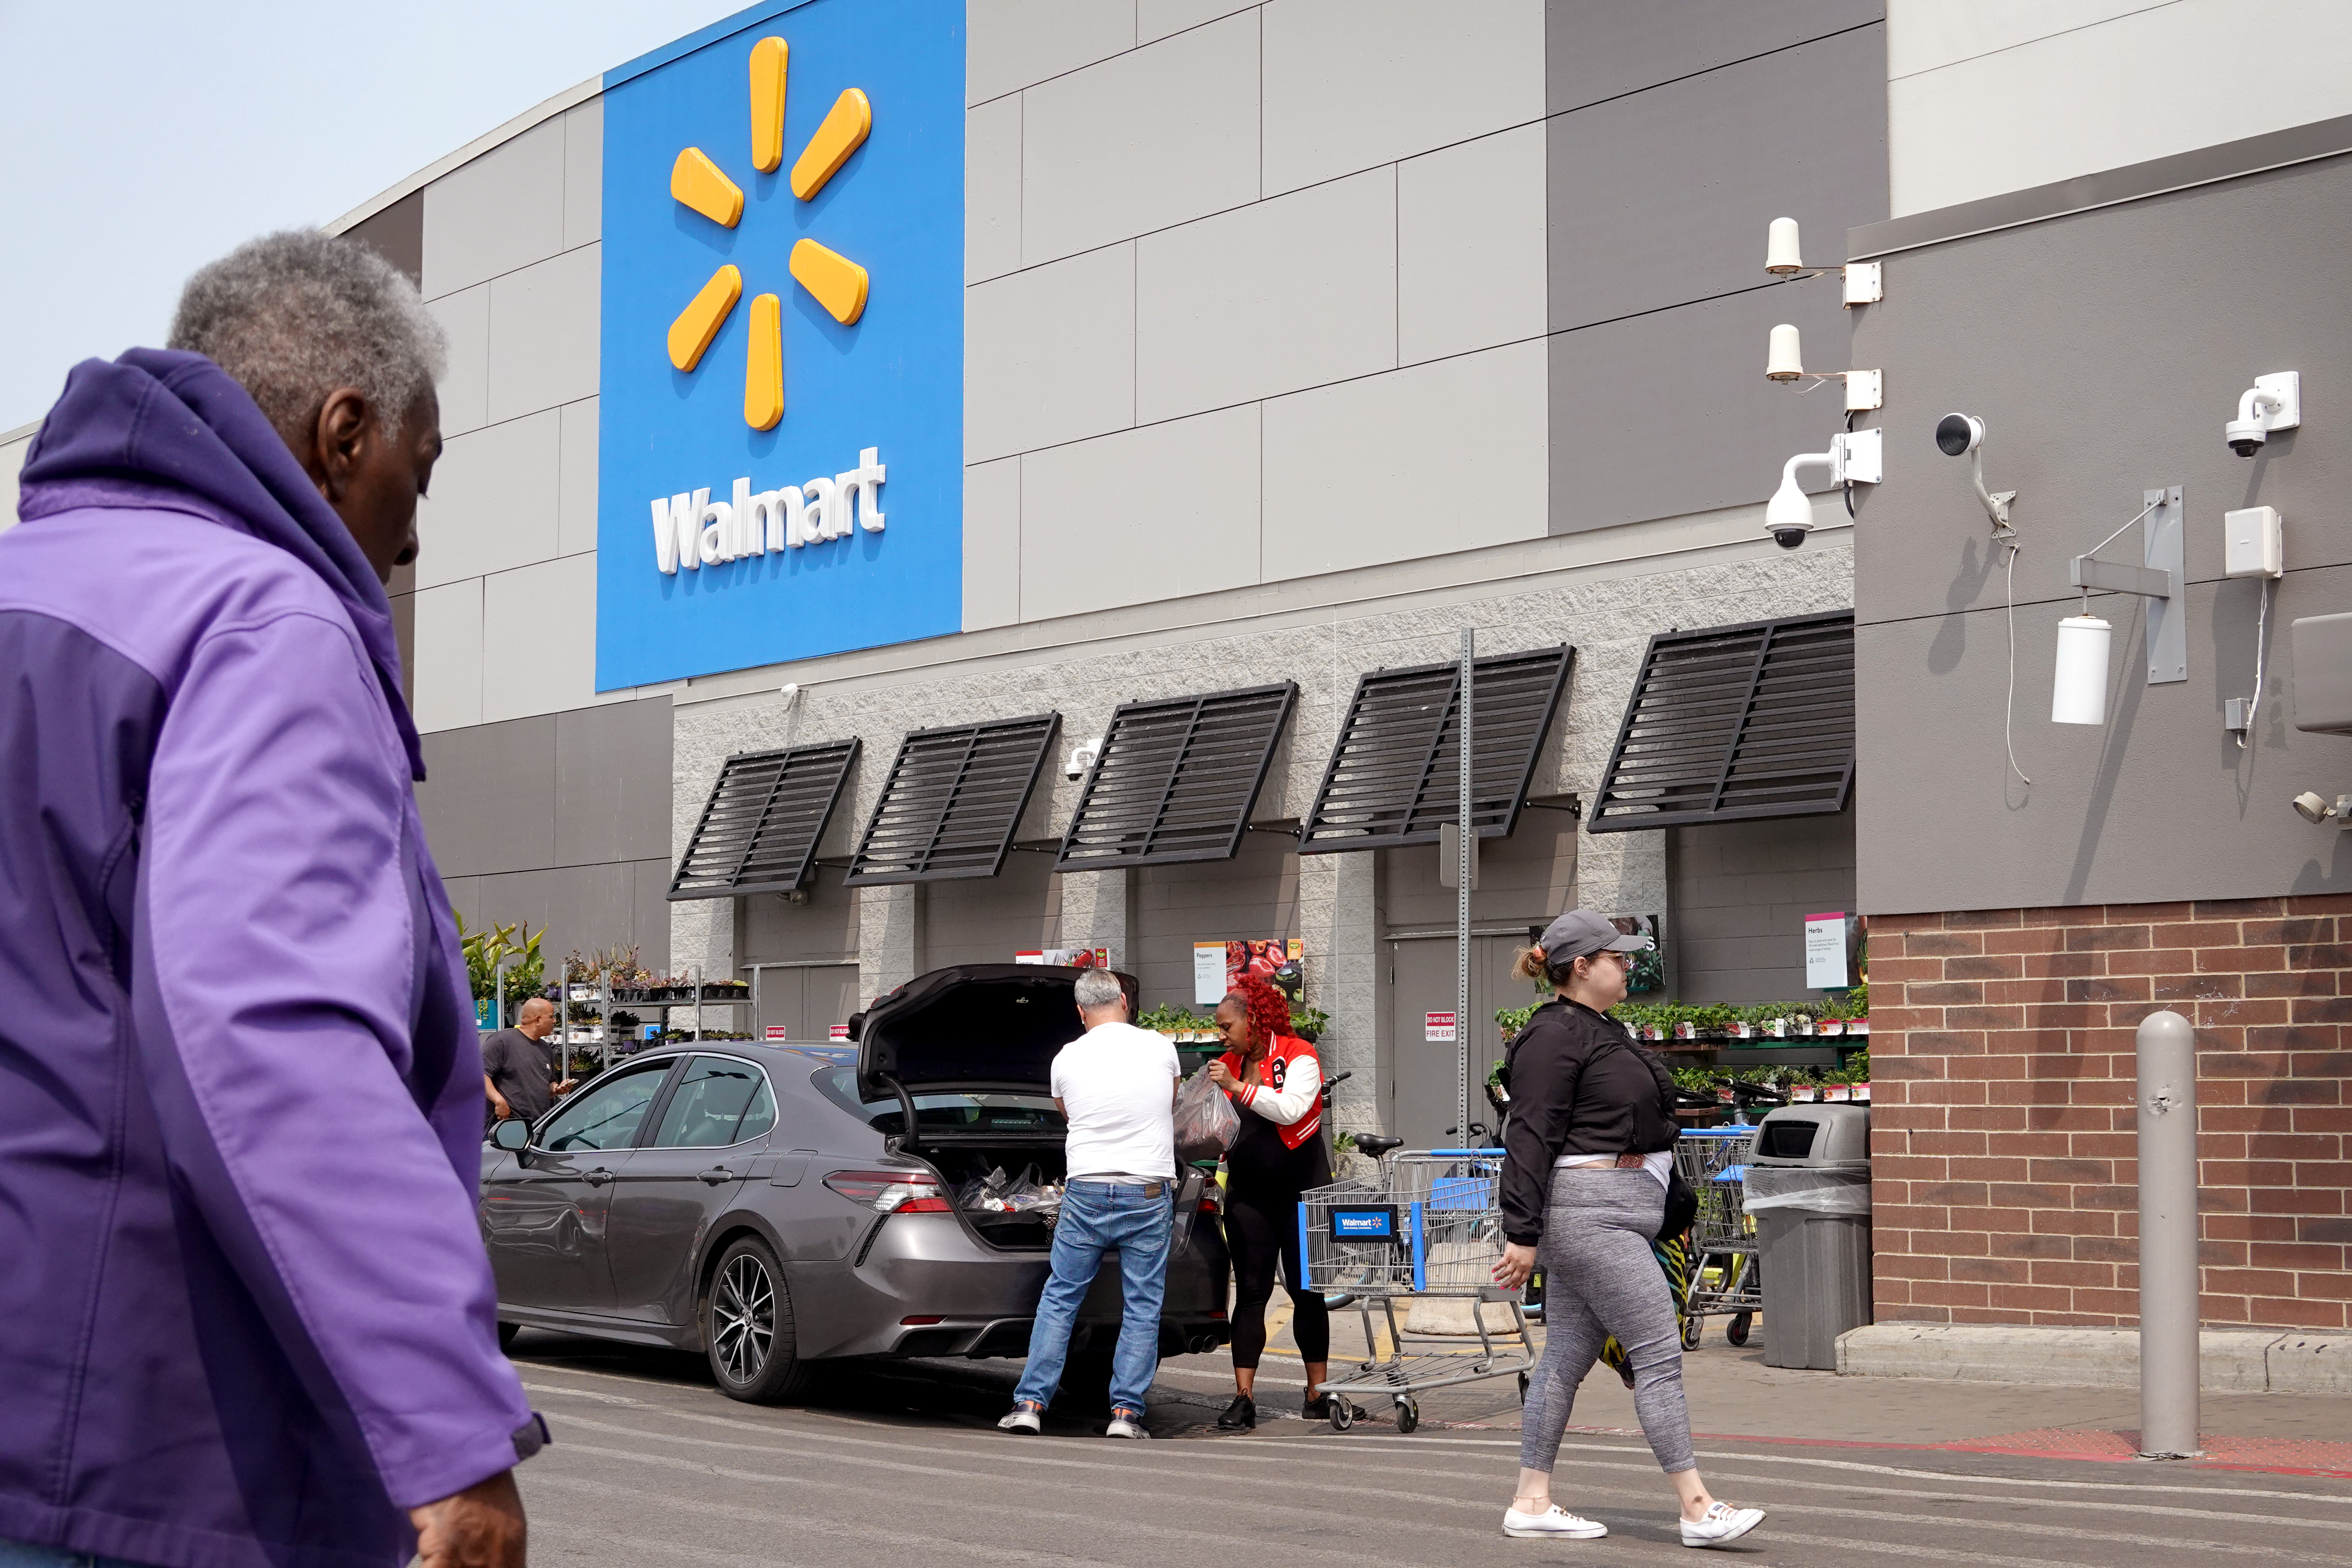 Walmart's online sales up 74 percent as shoppers shelter in place